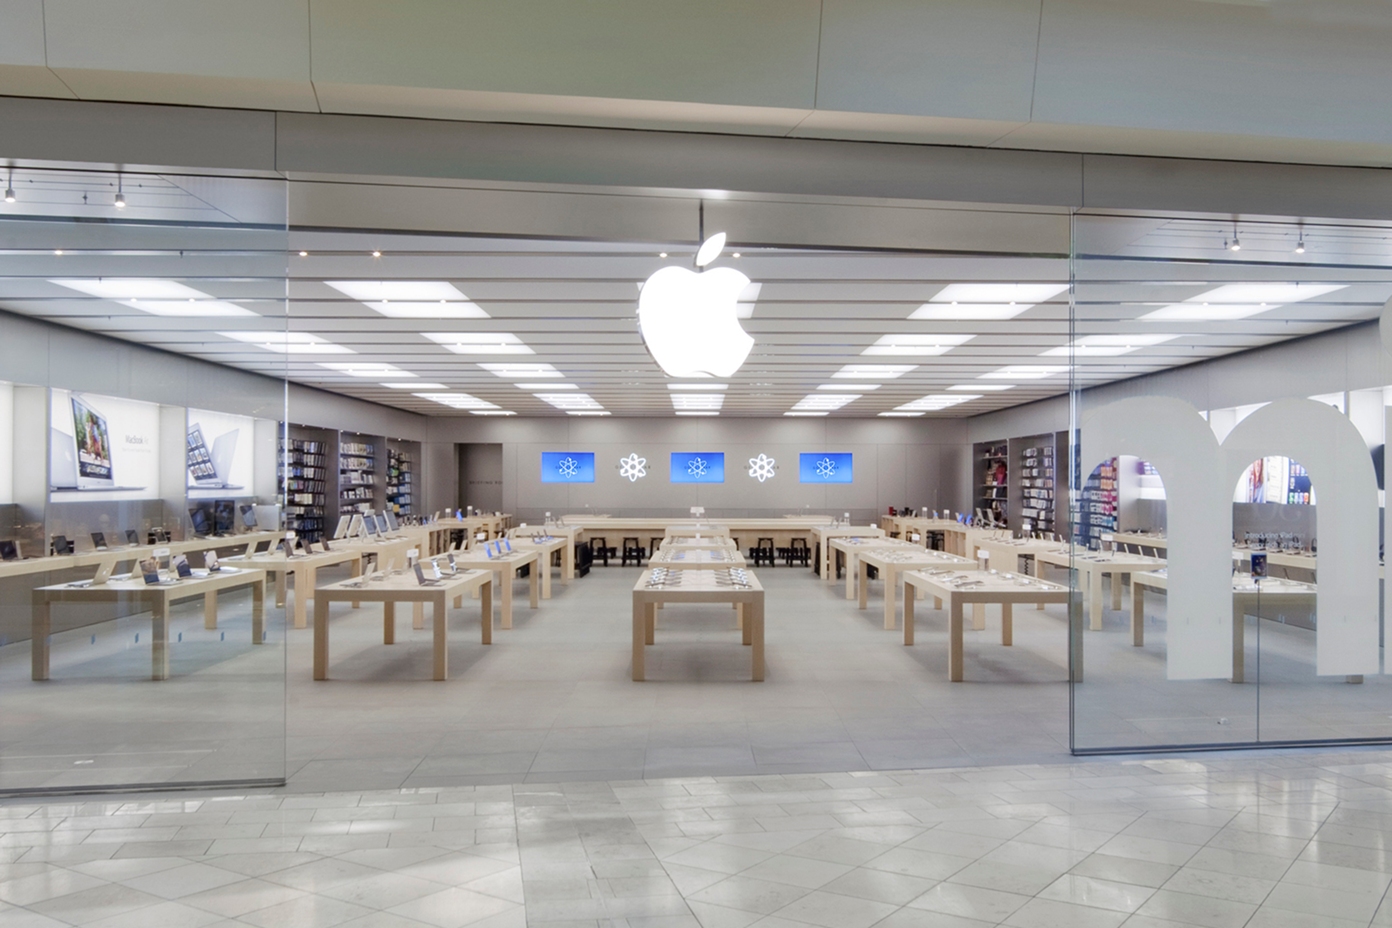 Apple Store, Apple Store in Florida Mall. @ Orlando, Florid…